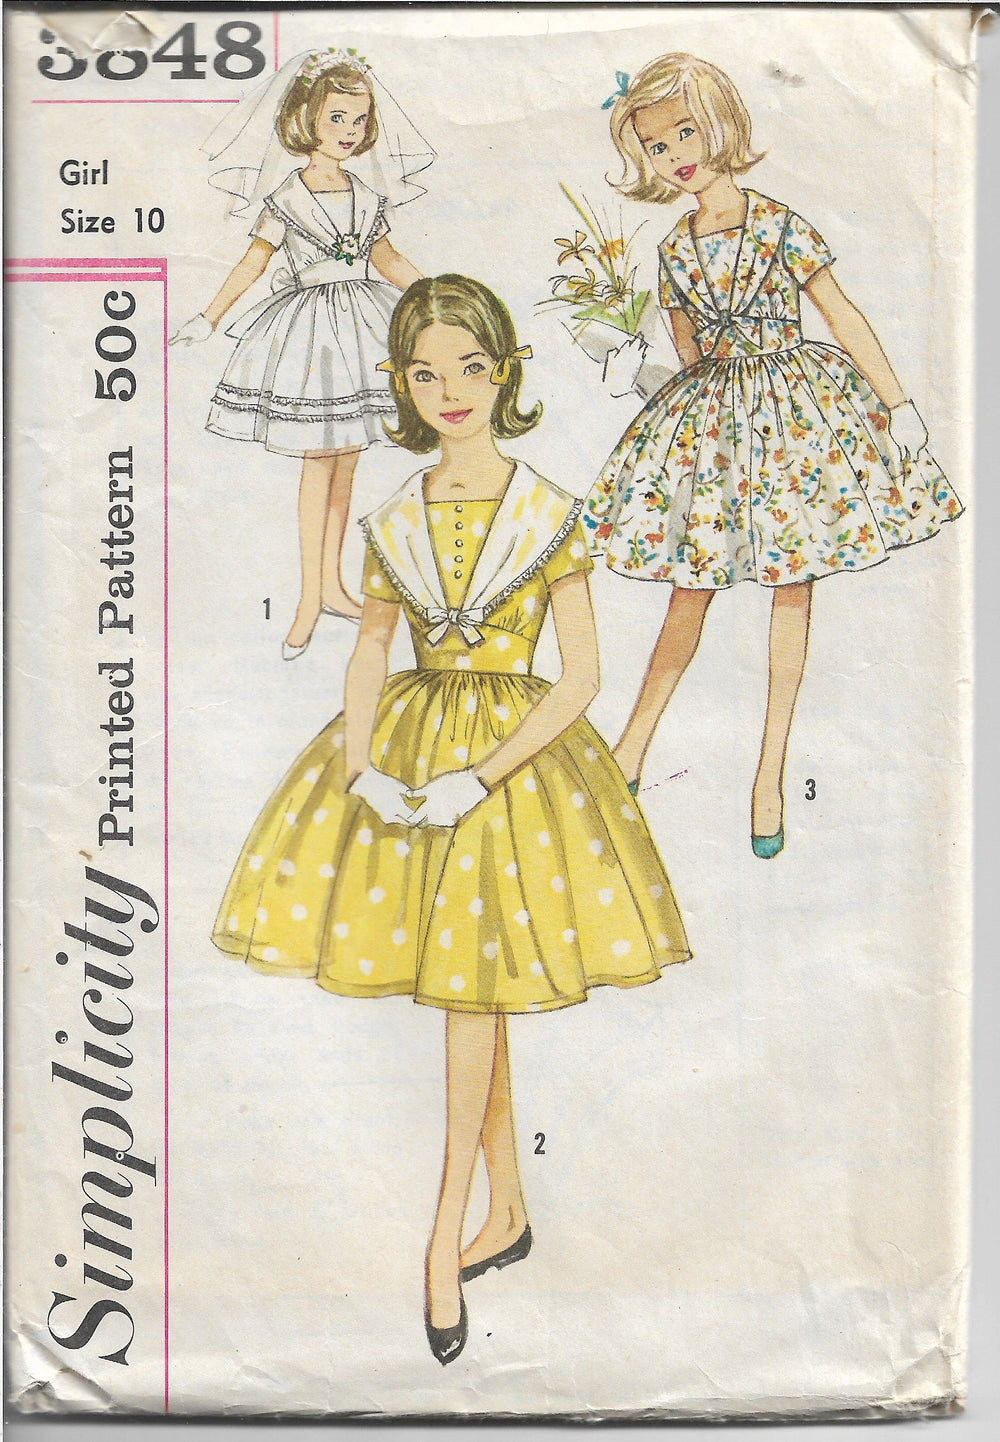 Simplicity 3848 Girls Party Dress Tie Collar Vintage Sewing Pattern 1960s - VintageStitching - Vintage Sewing Patterns